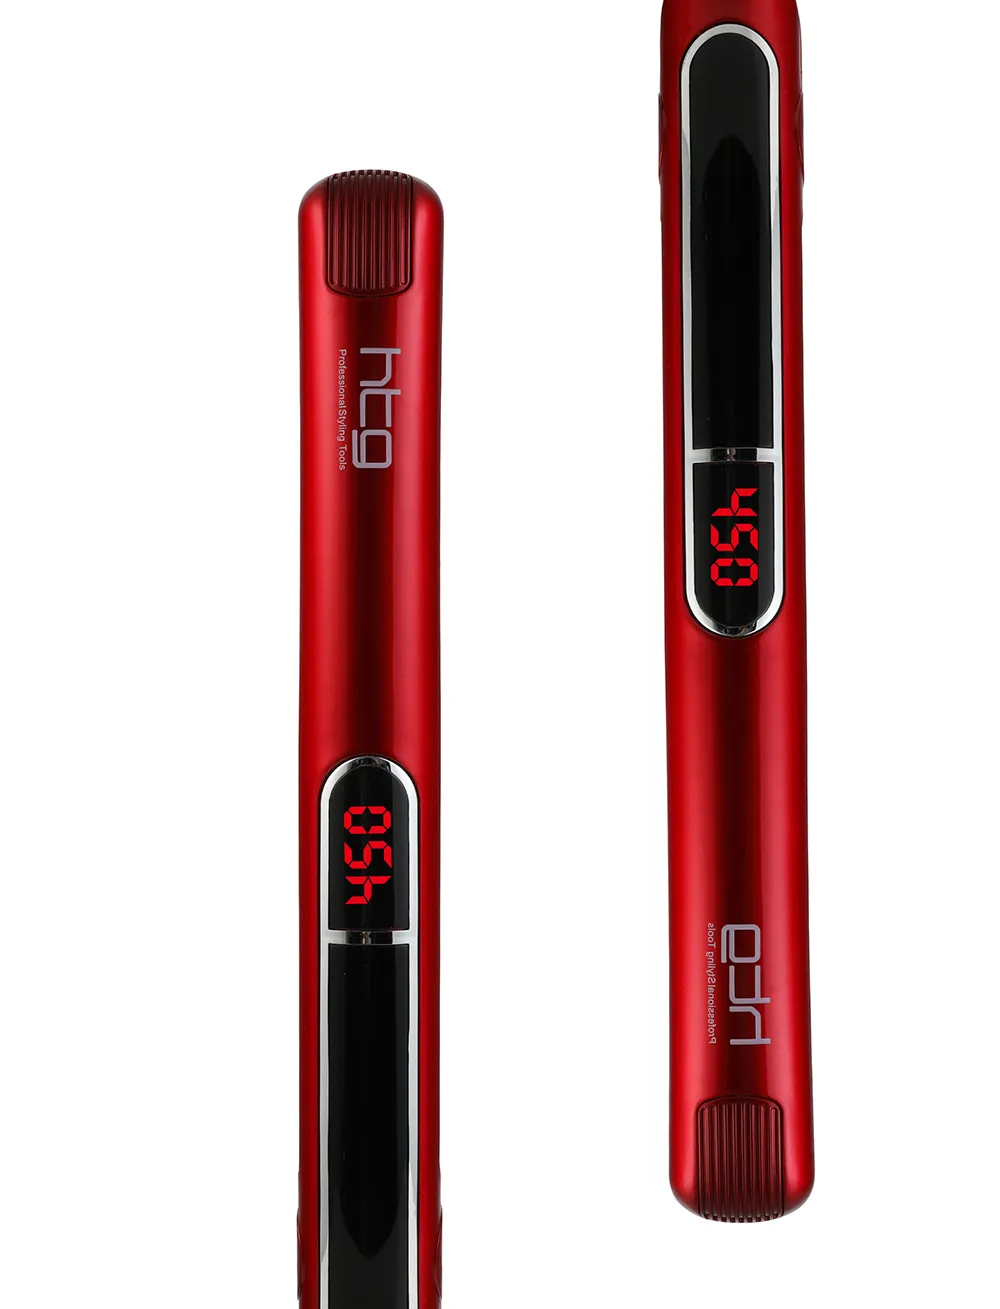 HTG Professional Hair Straightener with lONIC Infrared Hair Straightener Straightening iron LCD Display Hair Flat Iron HT087 CX5544111